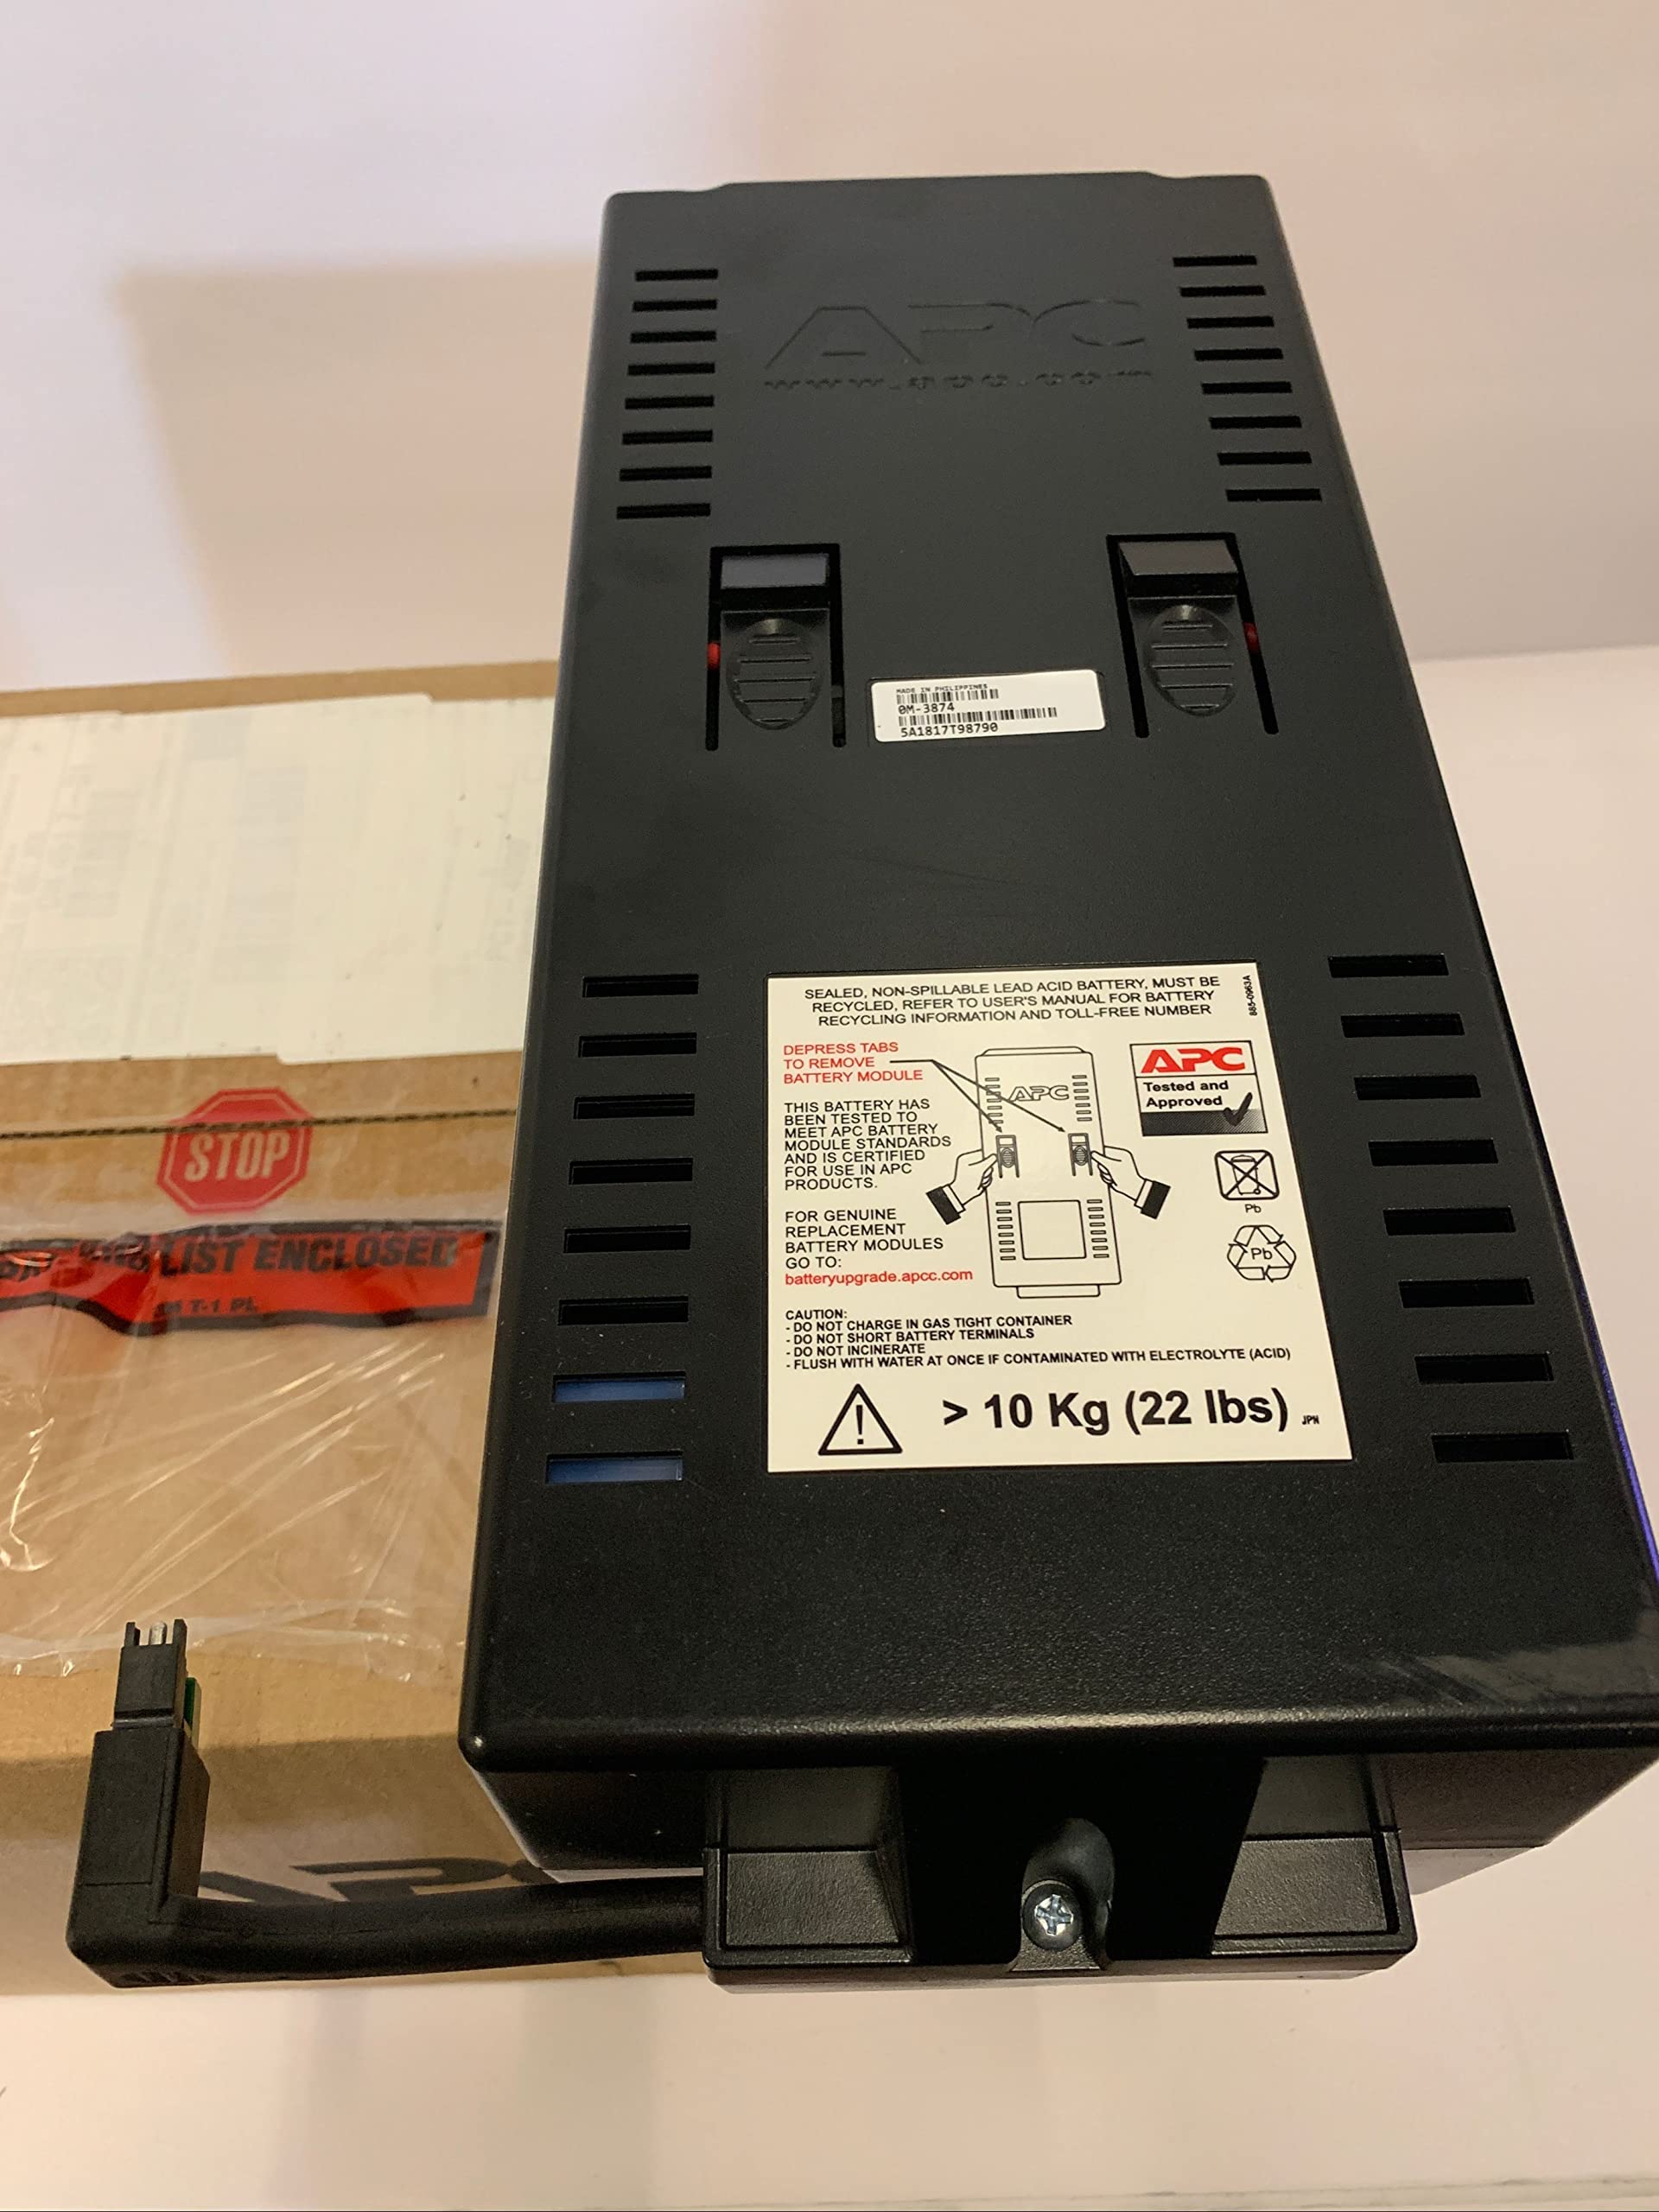 APC RBC63 300VAh UPS Replacement Battery Cartridge #63-48V DC - Spill Proof, Maintenance Free Sealed Lead Acid